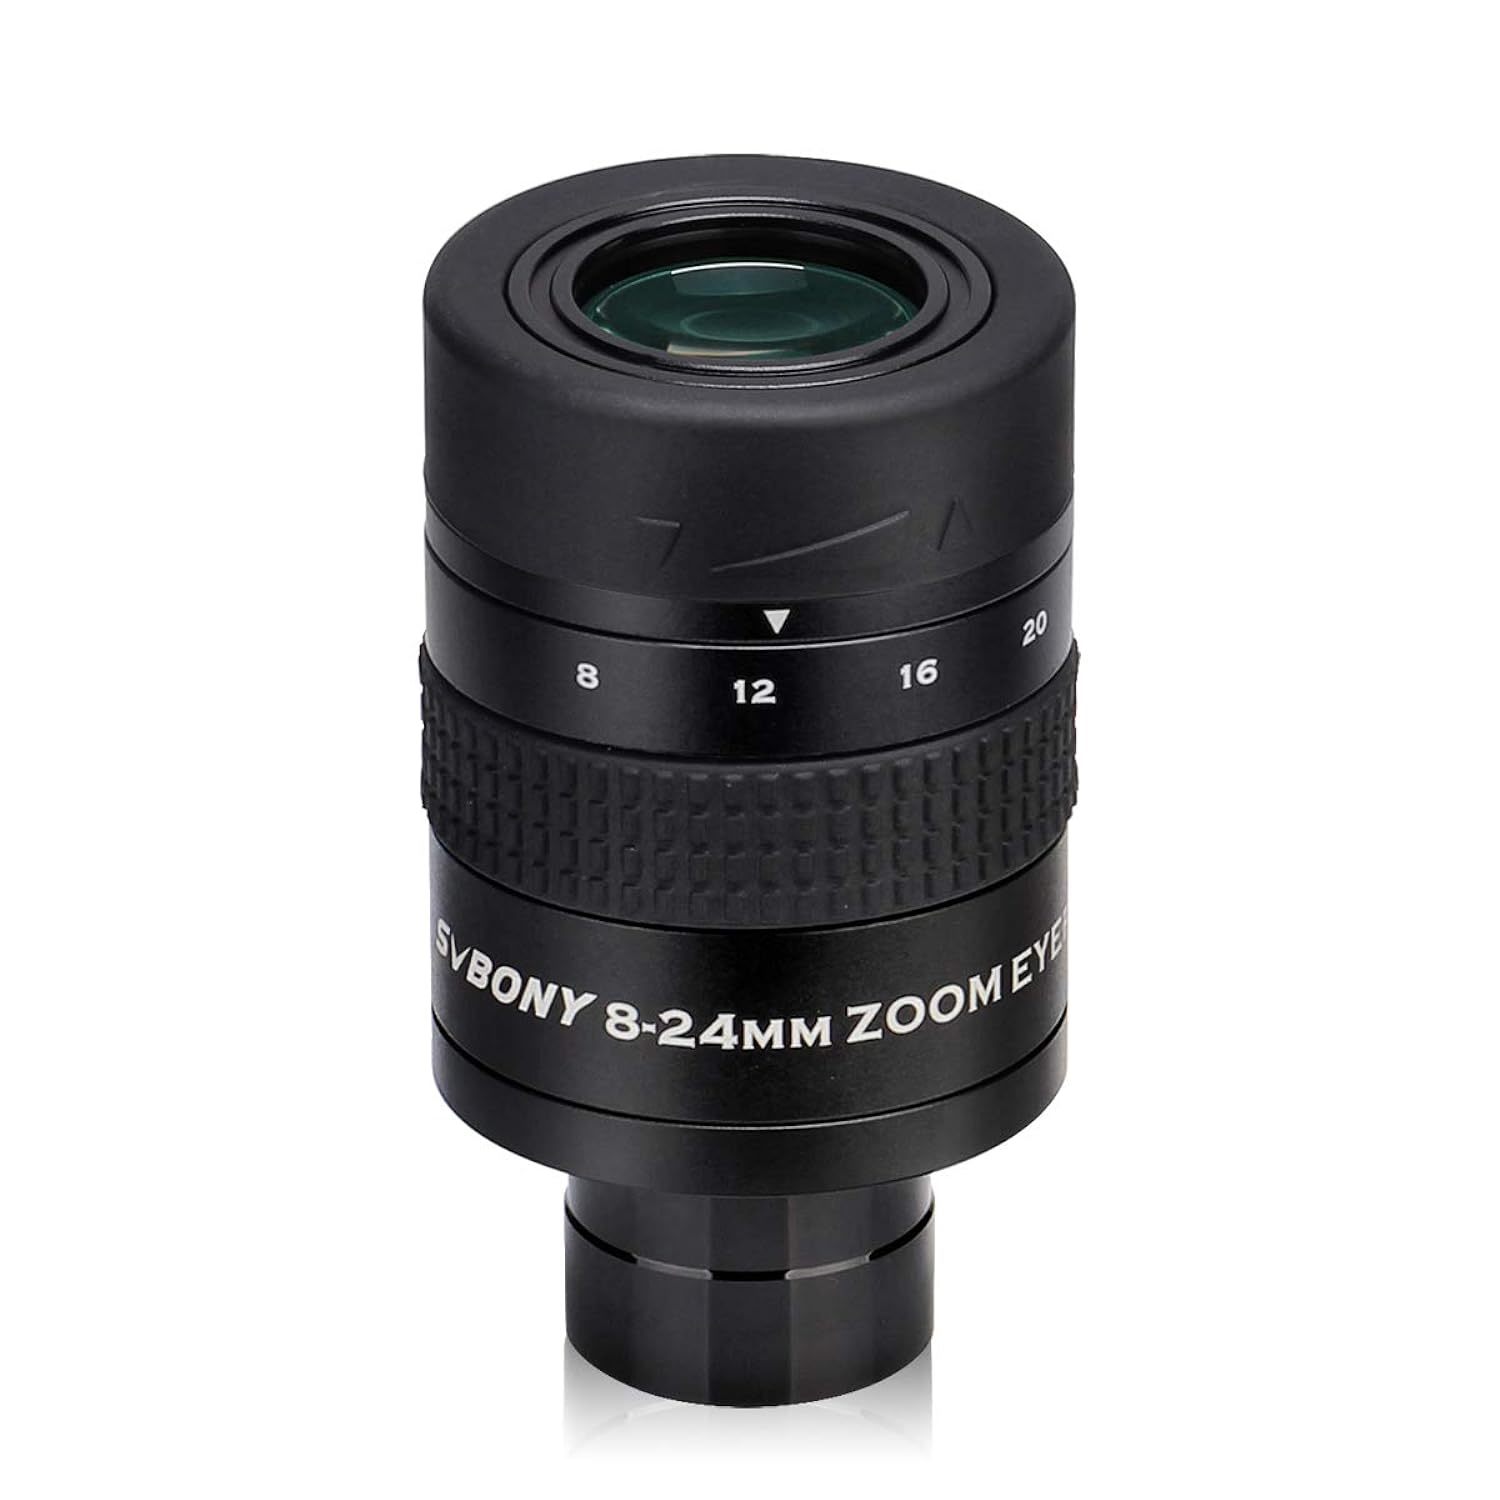 Primary image for Sv171 Telescope Eyepiece, Zoom Eyepiece, 1.25 Inch 8Mm To 24Mm Zoom Fmc 7 Elemen